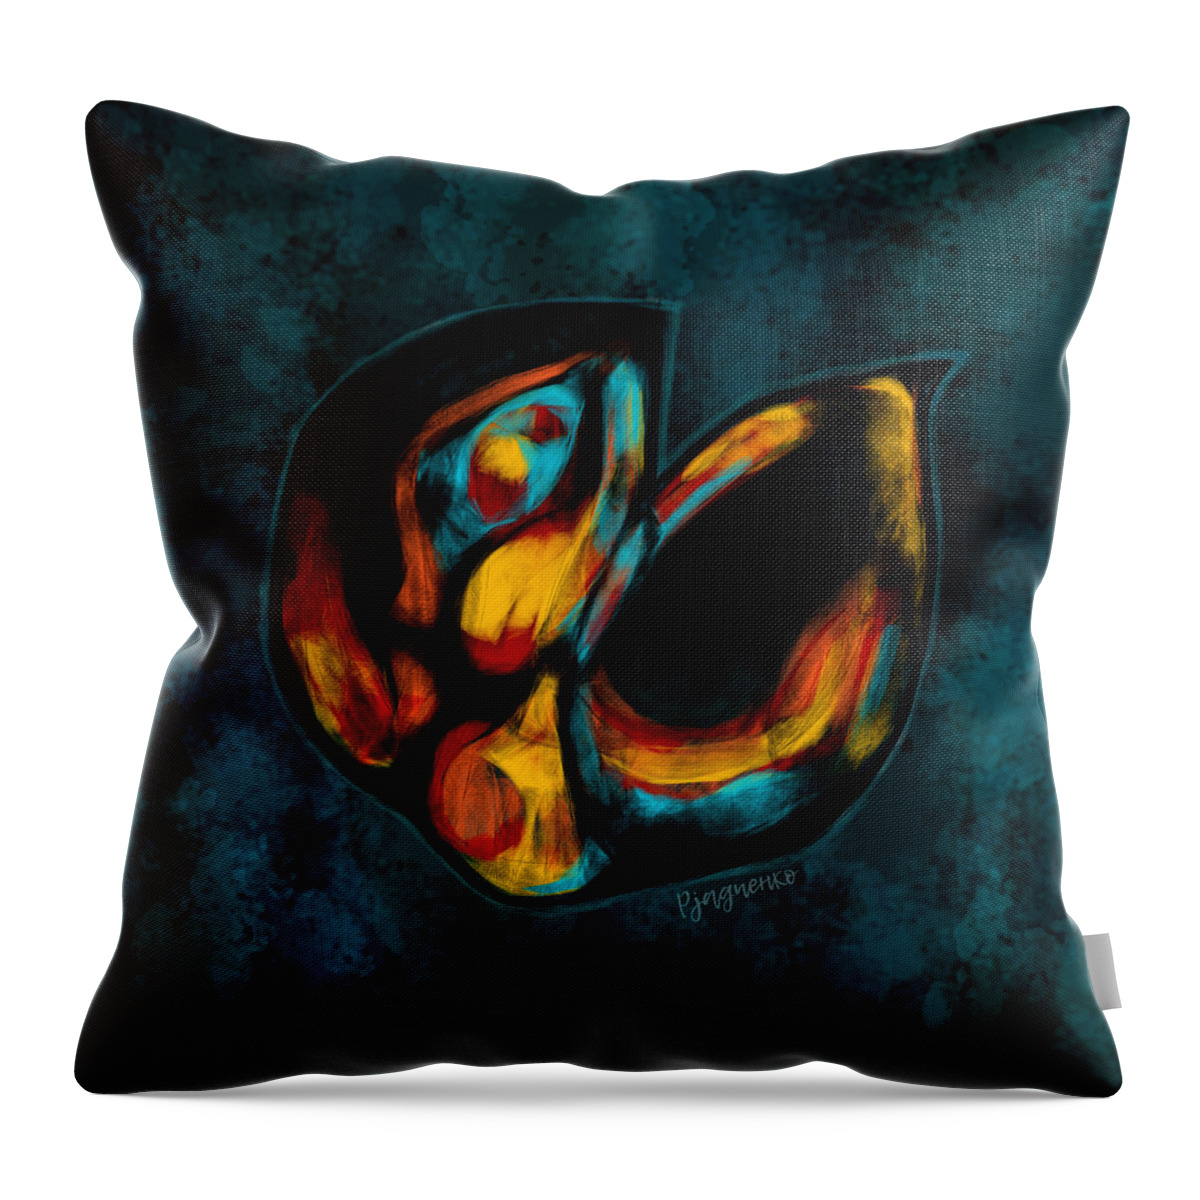 Cocoon Duo Throw Pillow featuring the digital art Cocoon duo by Ljev Rjadcenko